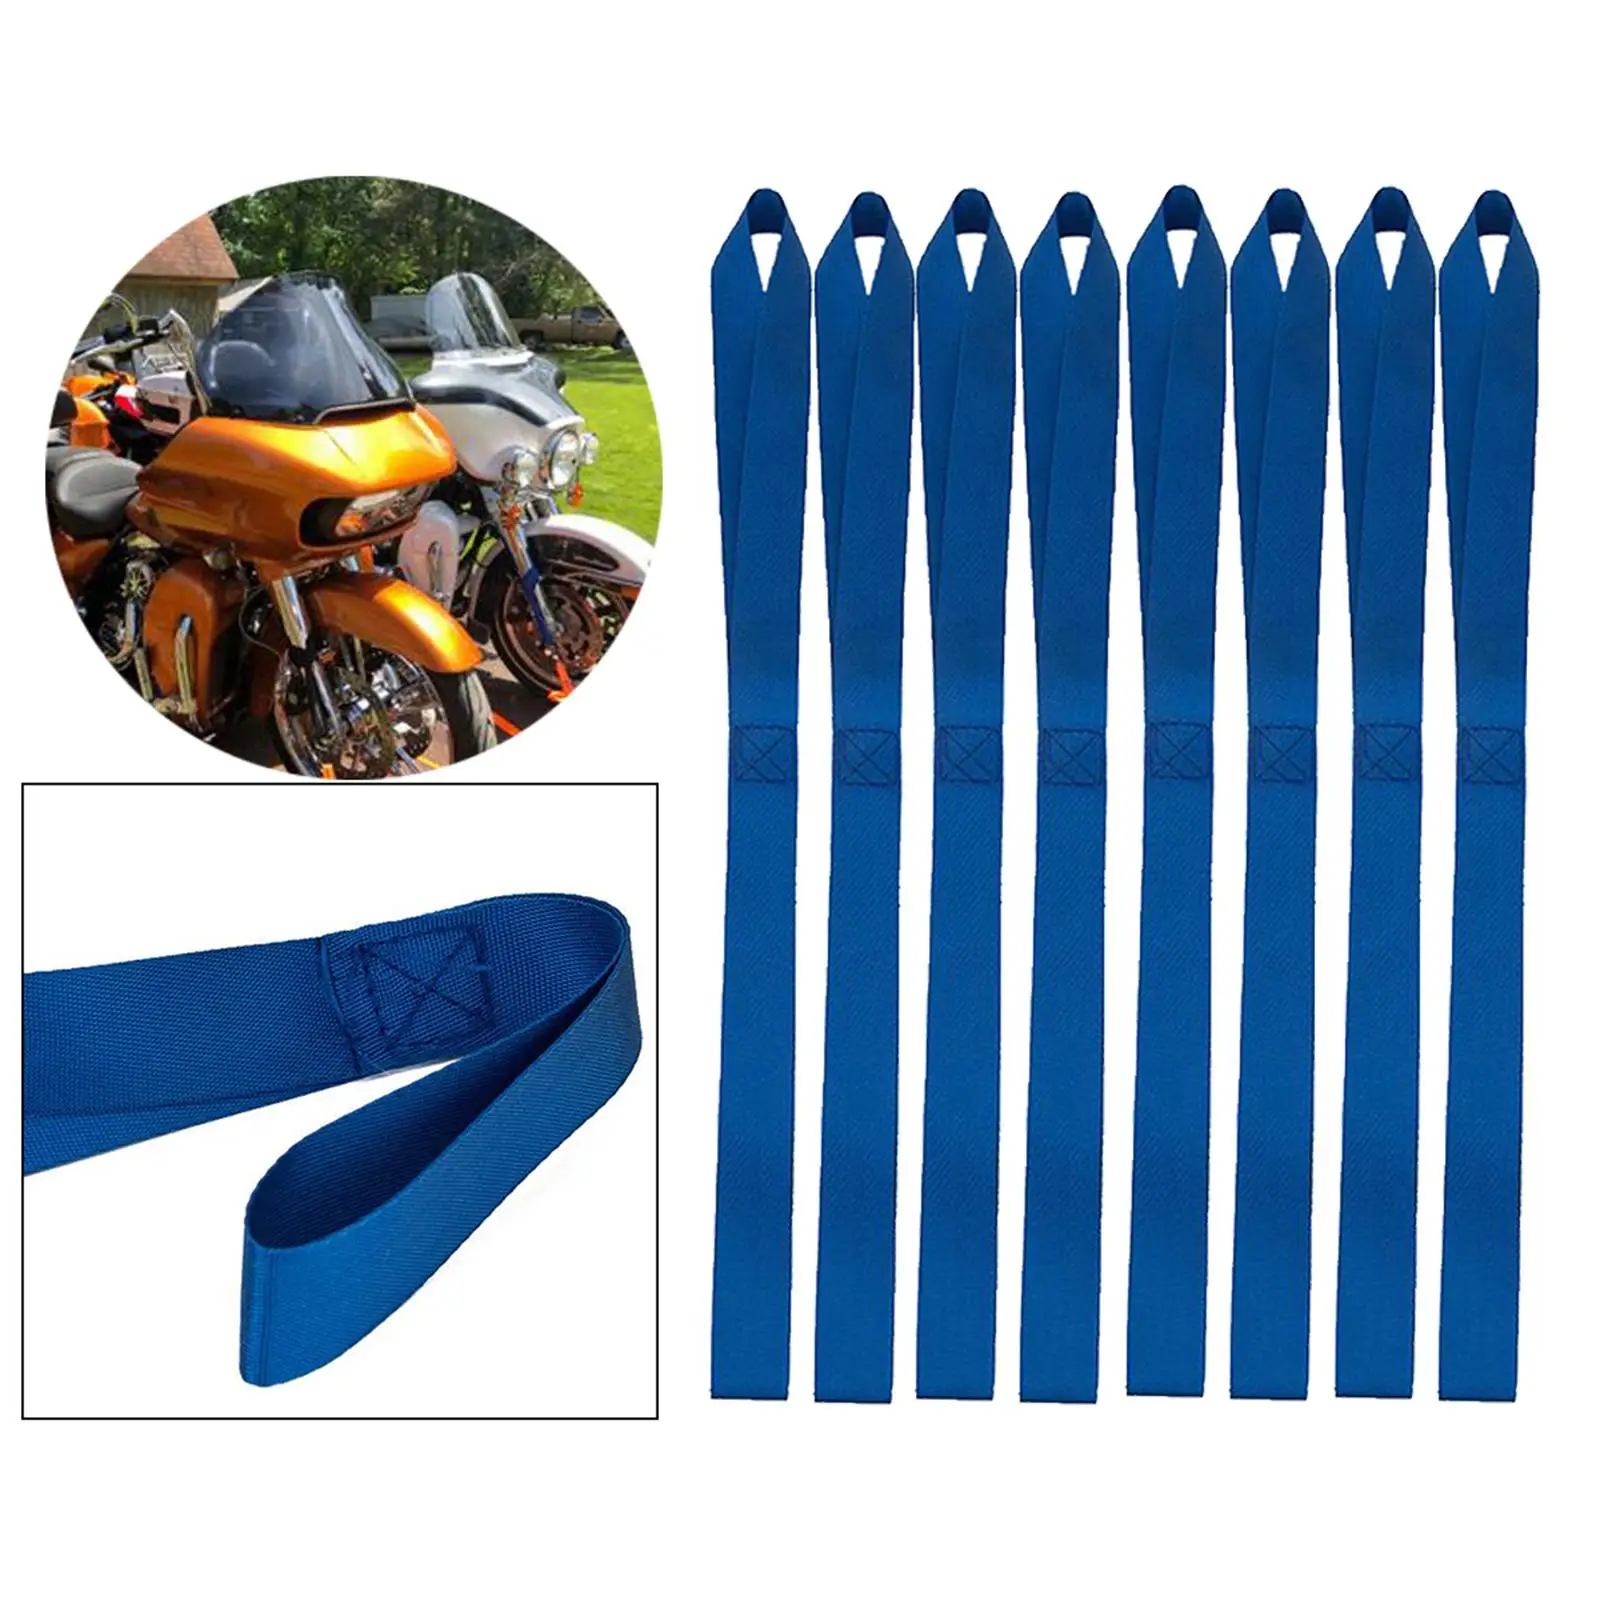 8pcs Heavy Duty Soft Loop tie Straps for Towing Trailering  Truck Boat Garden Equipment Abrasion Resistance